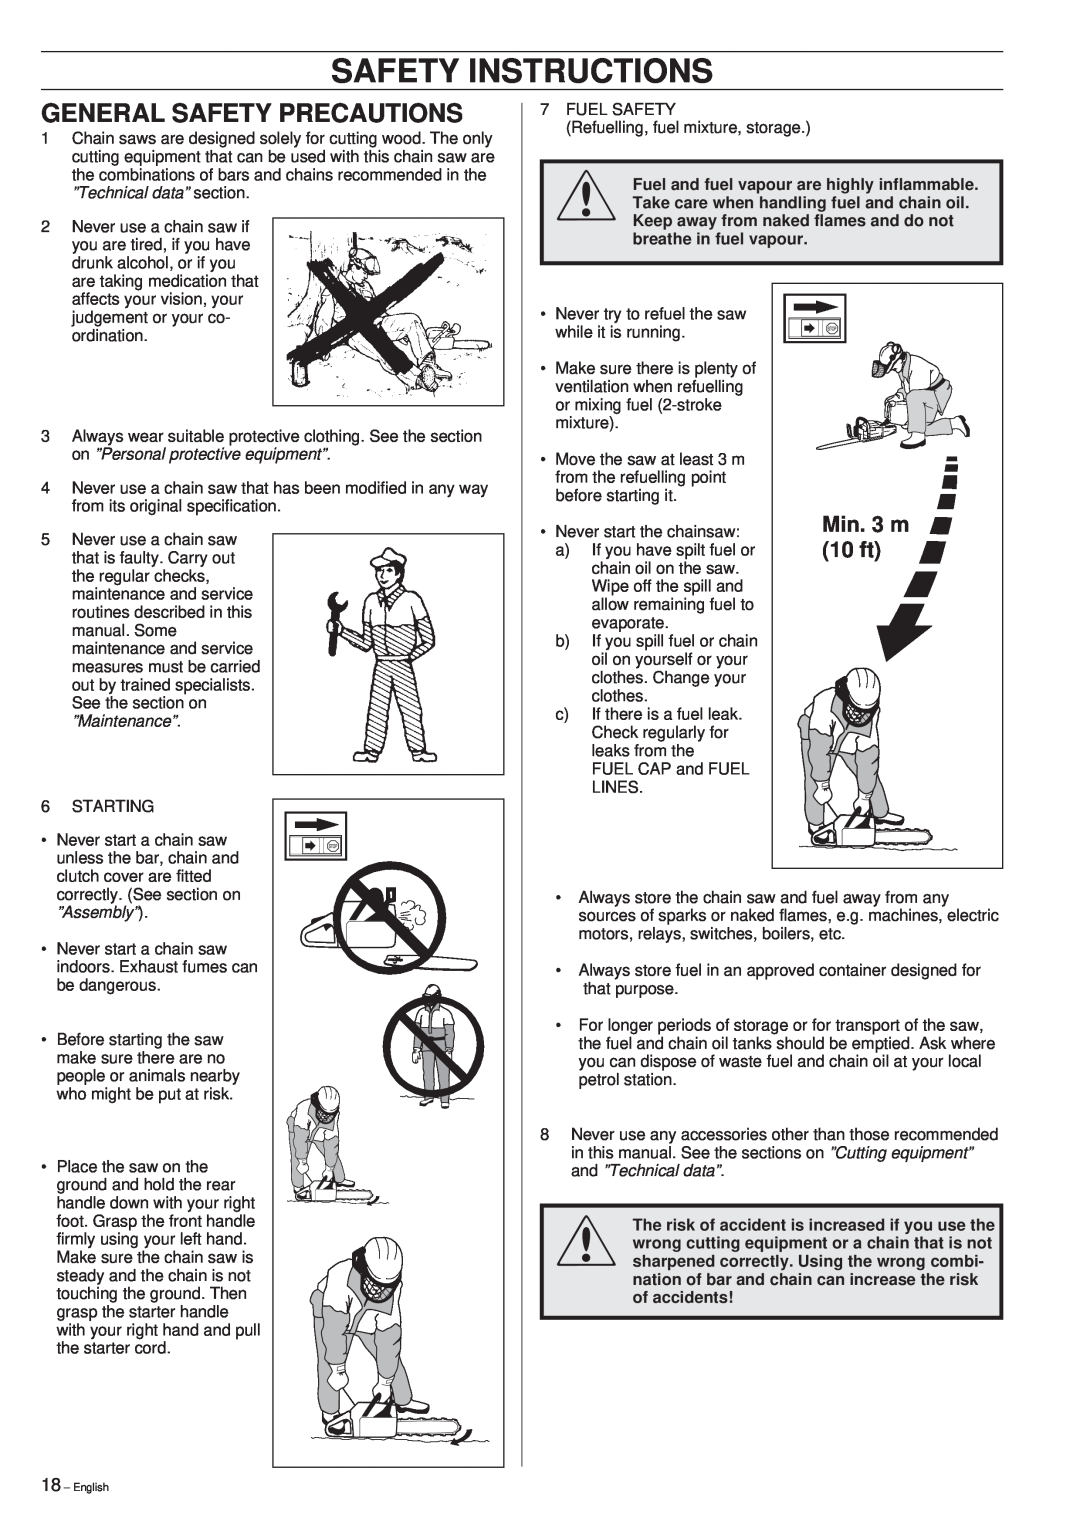 Husqvarna 288XP/XP lite Safety Instructions, Min. 3 m, 10 ft, ”Technical data” section, on ”Personal protective equipment” 